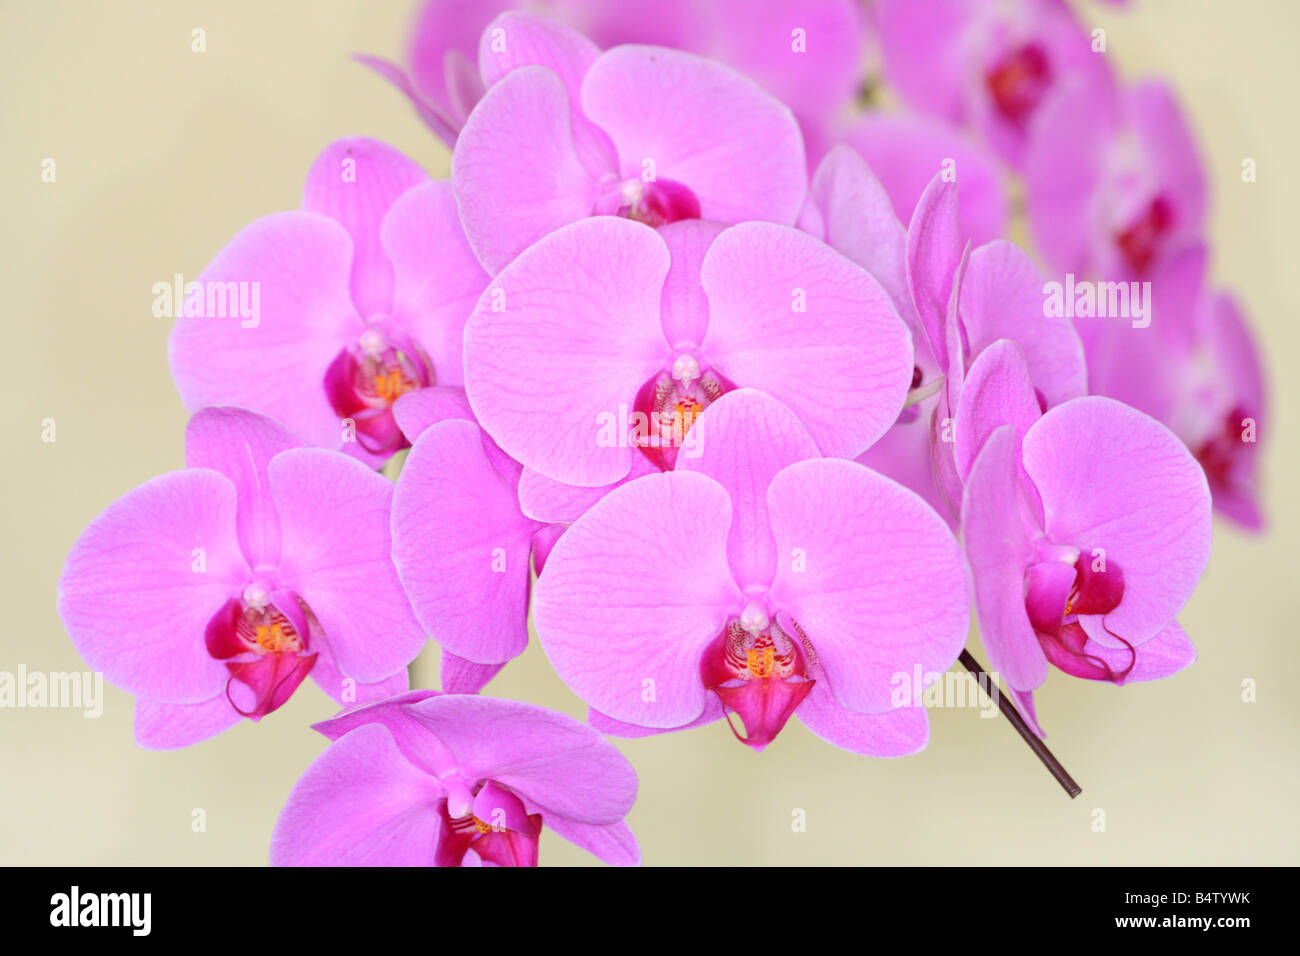 Phalaenopsis orchids on display at an exhibition. Stock Photo